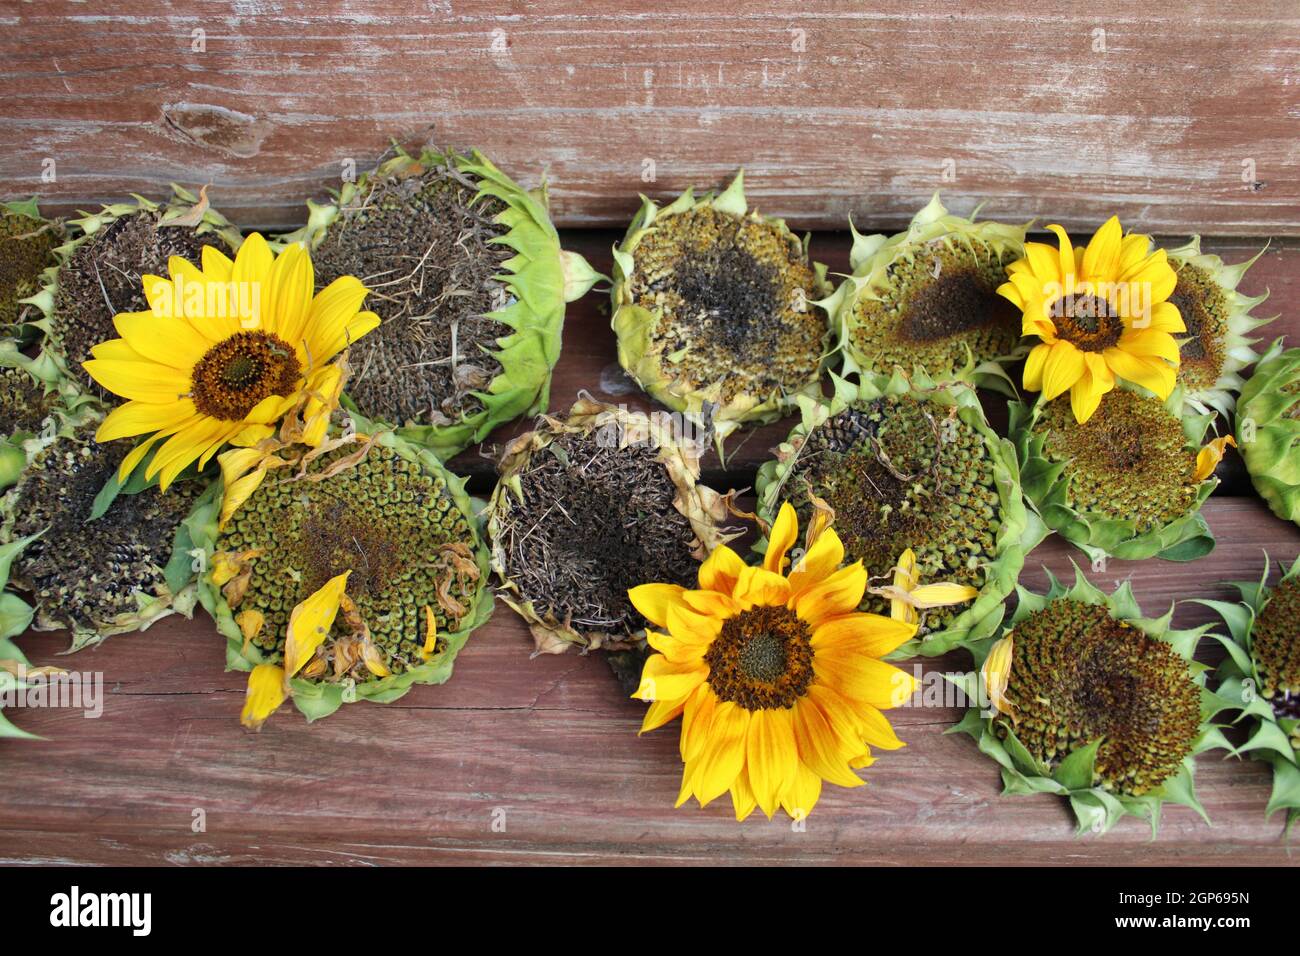 Harvested Sunflower heads drying out for next year. Stock Photo